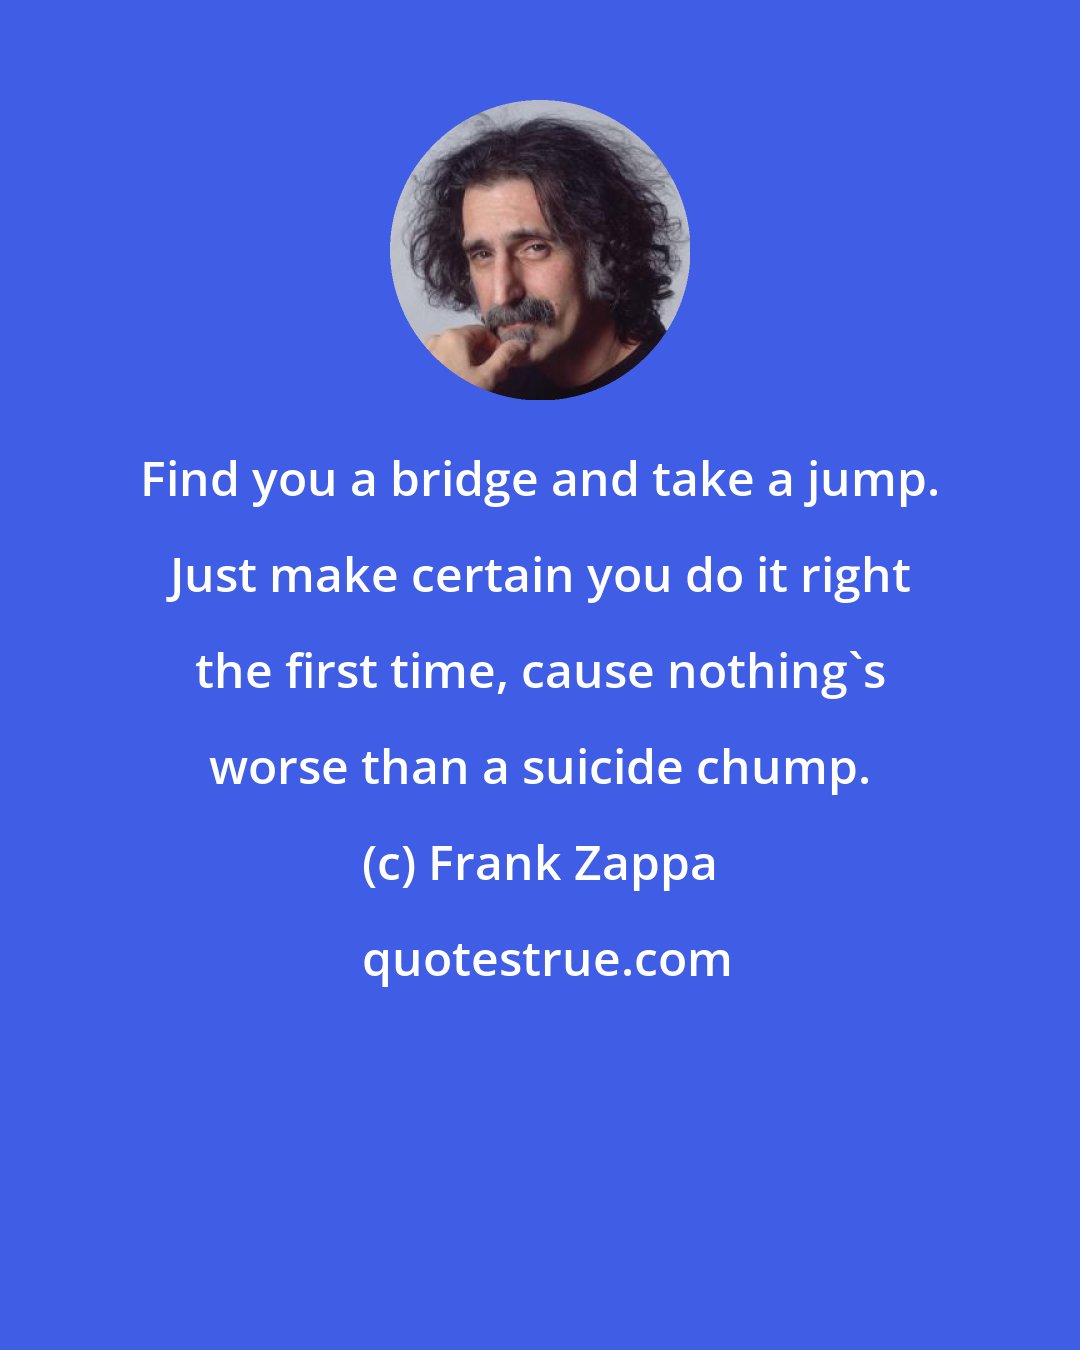 Frank Zappa: Find you a bridge and take a jump. Just make certain you do it right the first time, cause nothing's worse than a suicide chump.